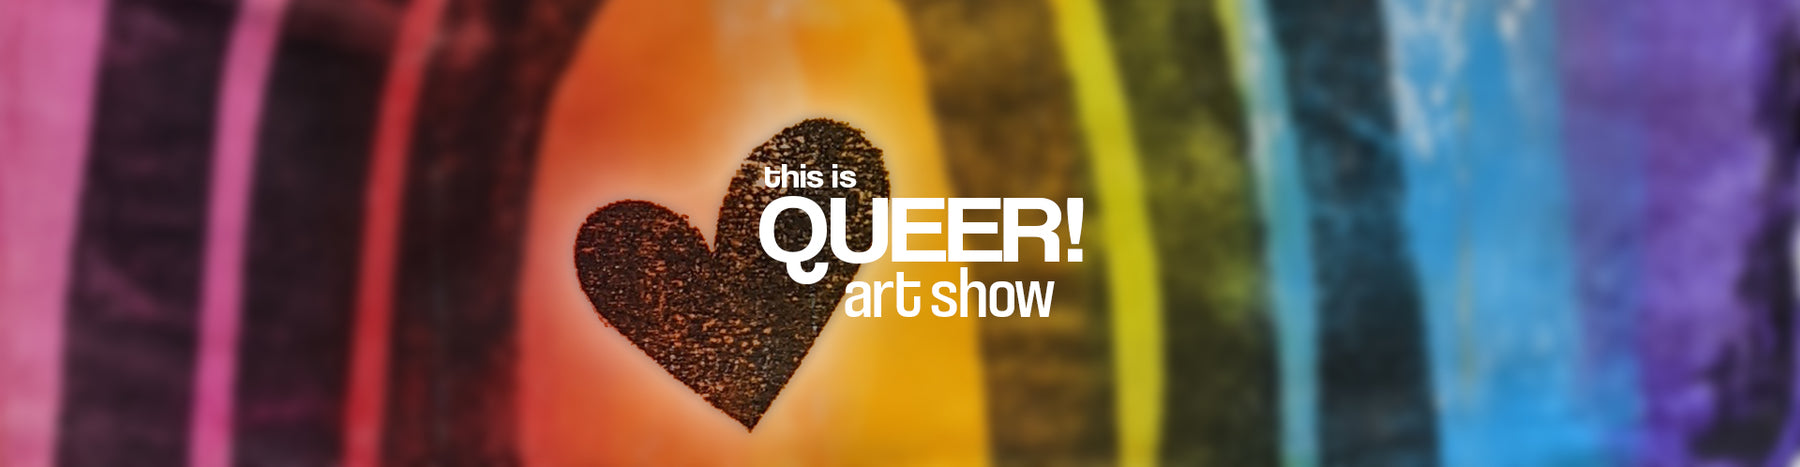 This is Queer! Art show